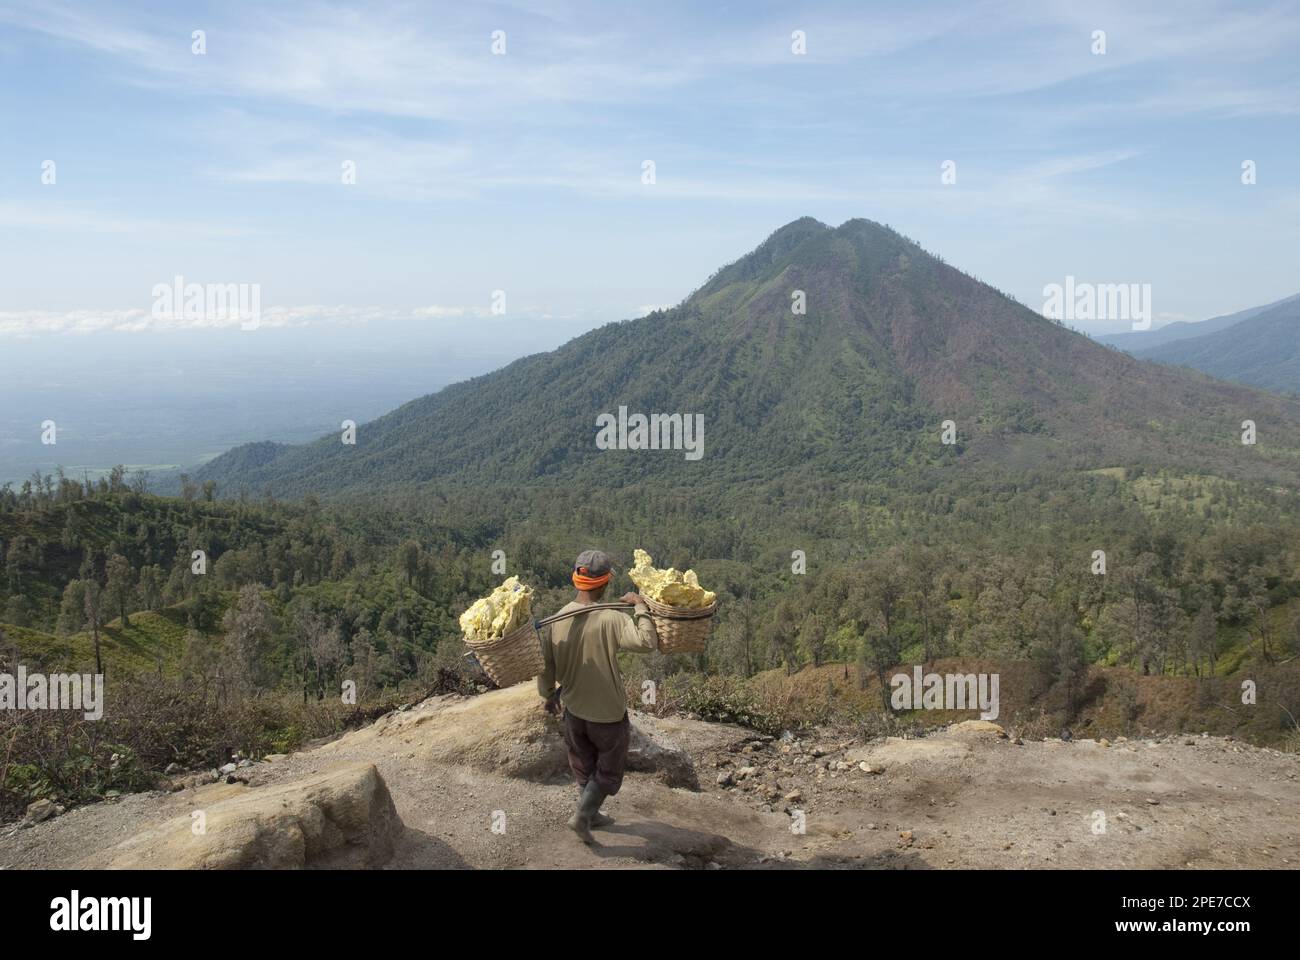 Local man carrying sulphur blocks in baskets down from the crater, with volcano in the background, Mount Ijen, East Java, Indonesia Stock Photo